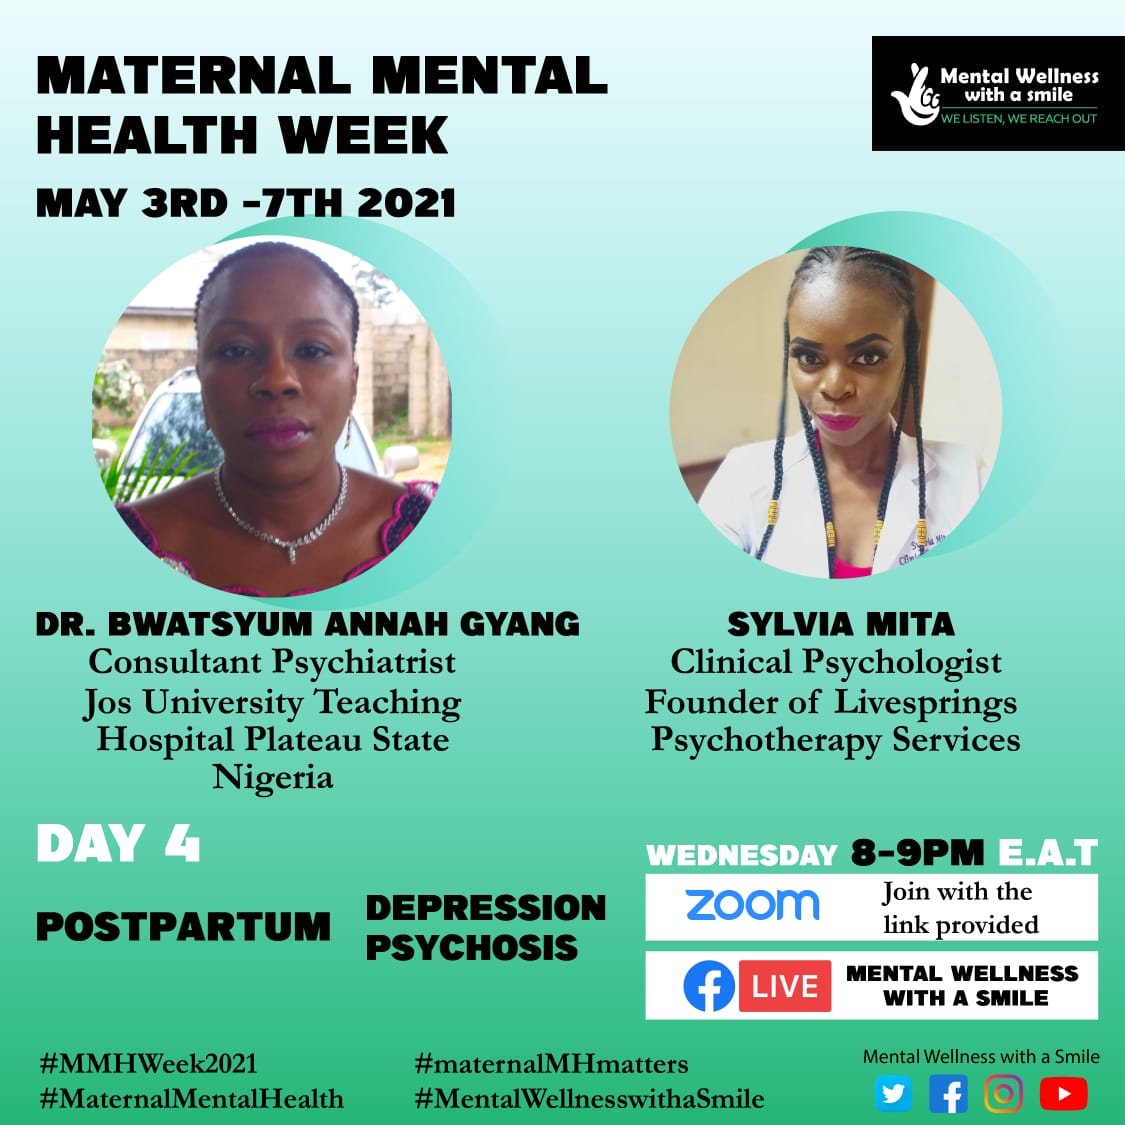 MENTAL WELLNESS WITH A SMILE is inviting you to a scheduled Zoom meeting.
Topic: POSTPARTUM DEPRESSION AND PSYCHOSIS
Time: May 5, 2021 08:00 PM Nairobi
us02web.zoom.us/j/86495430151?…
Meeting ID: 864 9543 0151
Passcode: 554150
#MMHWeek2021
#maternalMHmatters
#MaternalMentalHealth